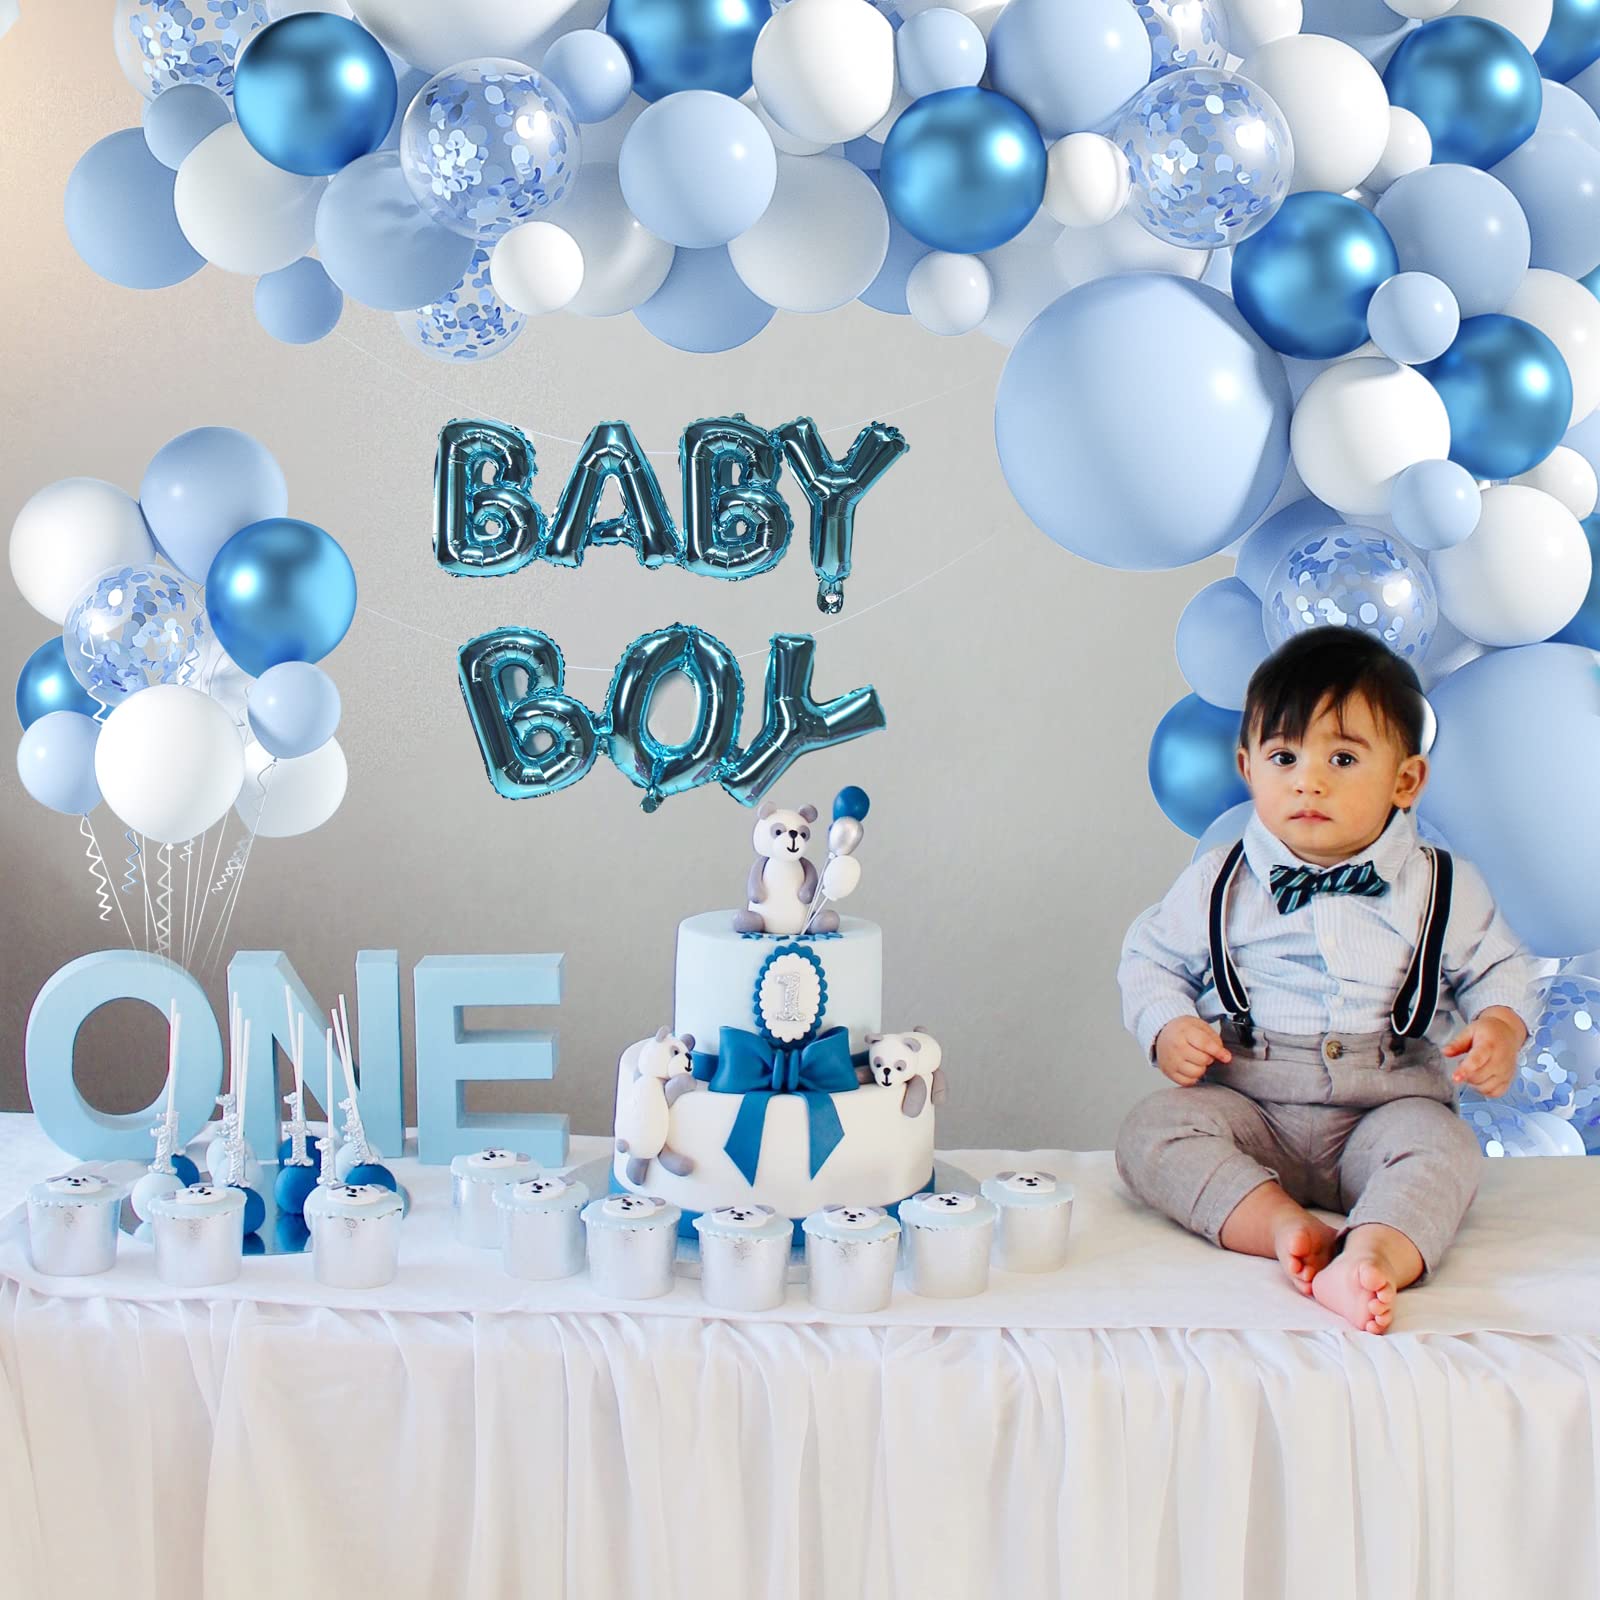 Janinus Blue And White Balloon Arch Garland Kit - Baby Boy Balloons Arch Different Sizes 5 12 18 Inch Blue White Balloons for Boys Baby Shower Decorations Birthday Engagement Party Gender Reveal Decor